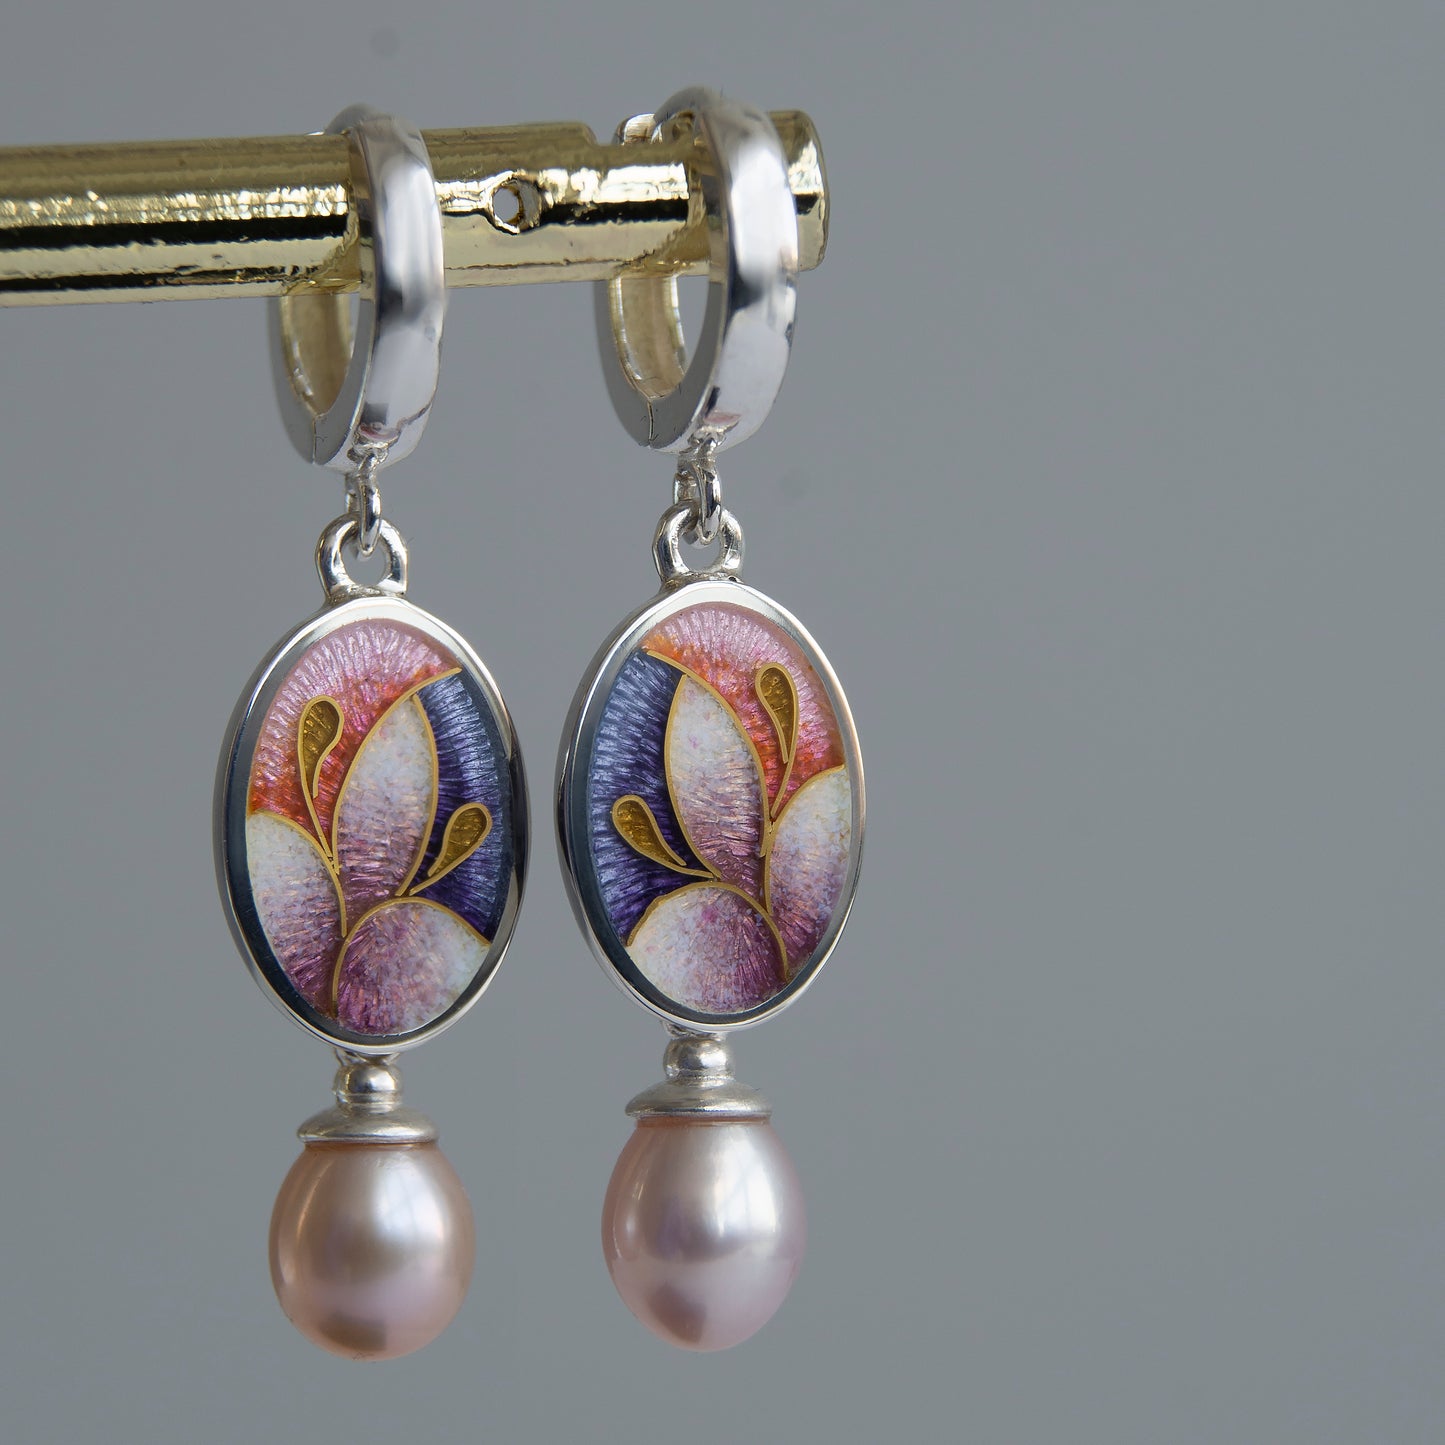 Cloisonne Enamel Earrings With Rose Pearls and Gold Wire Pattern